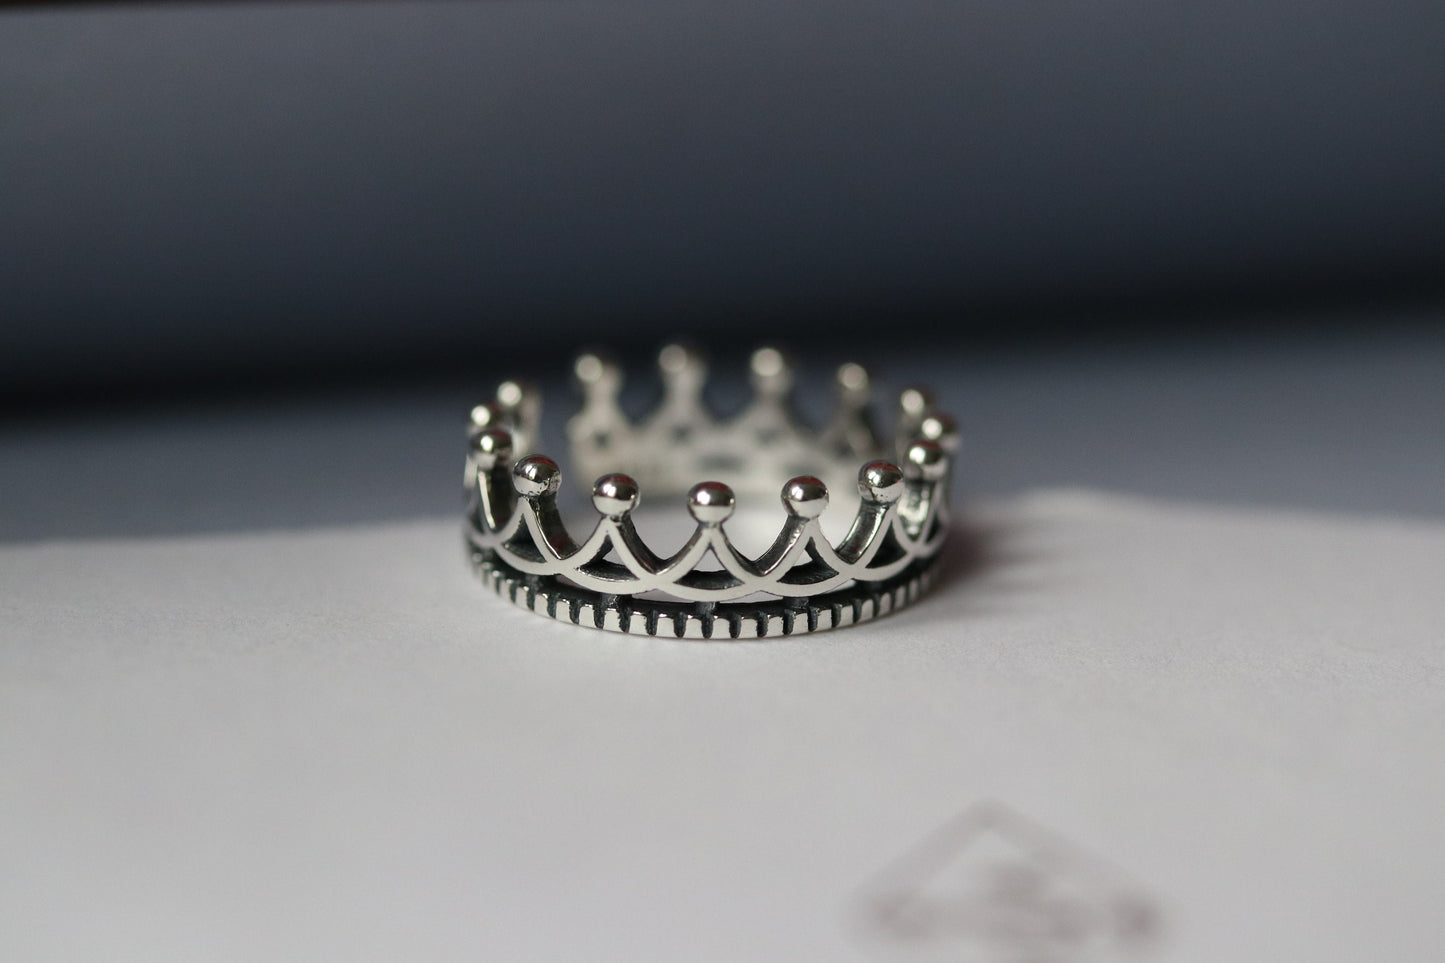 Handmade Crown Ring in Sterling Silver, Adjustable Vintage Polished Crown Open Ring, Minimalist Adjustable Stackable Ring, Gift for Her